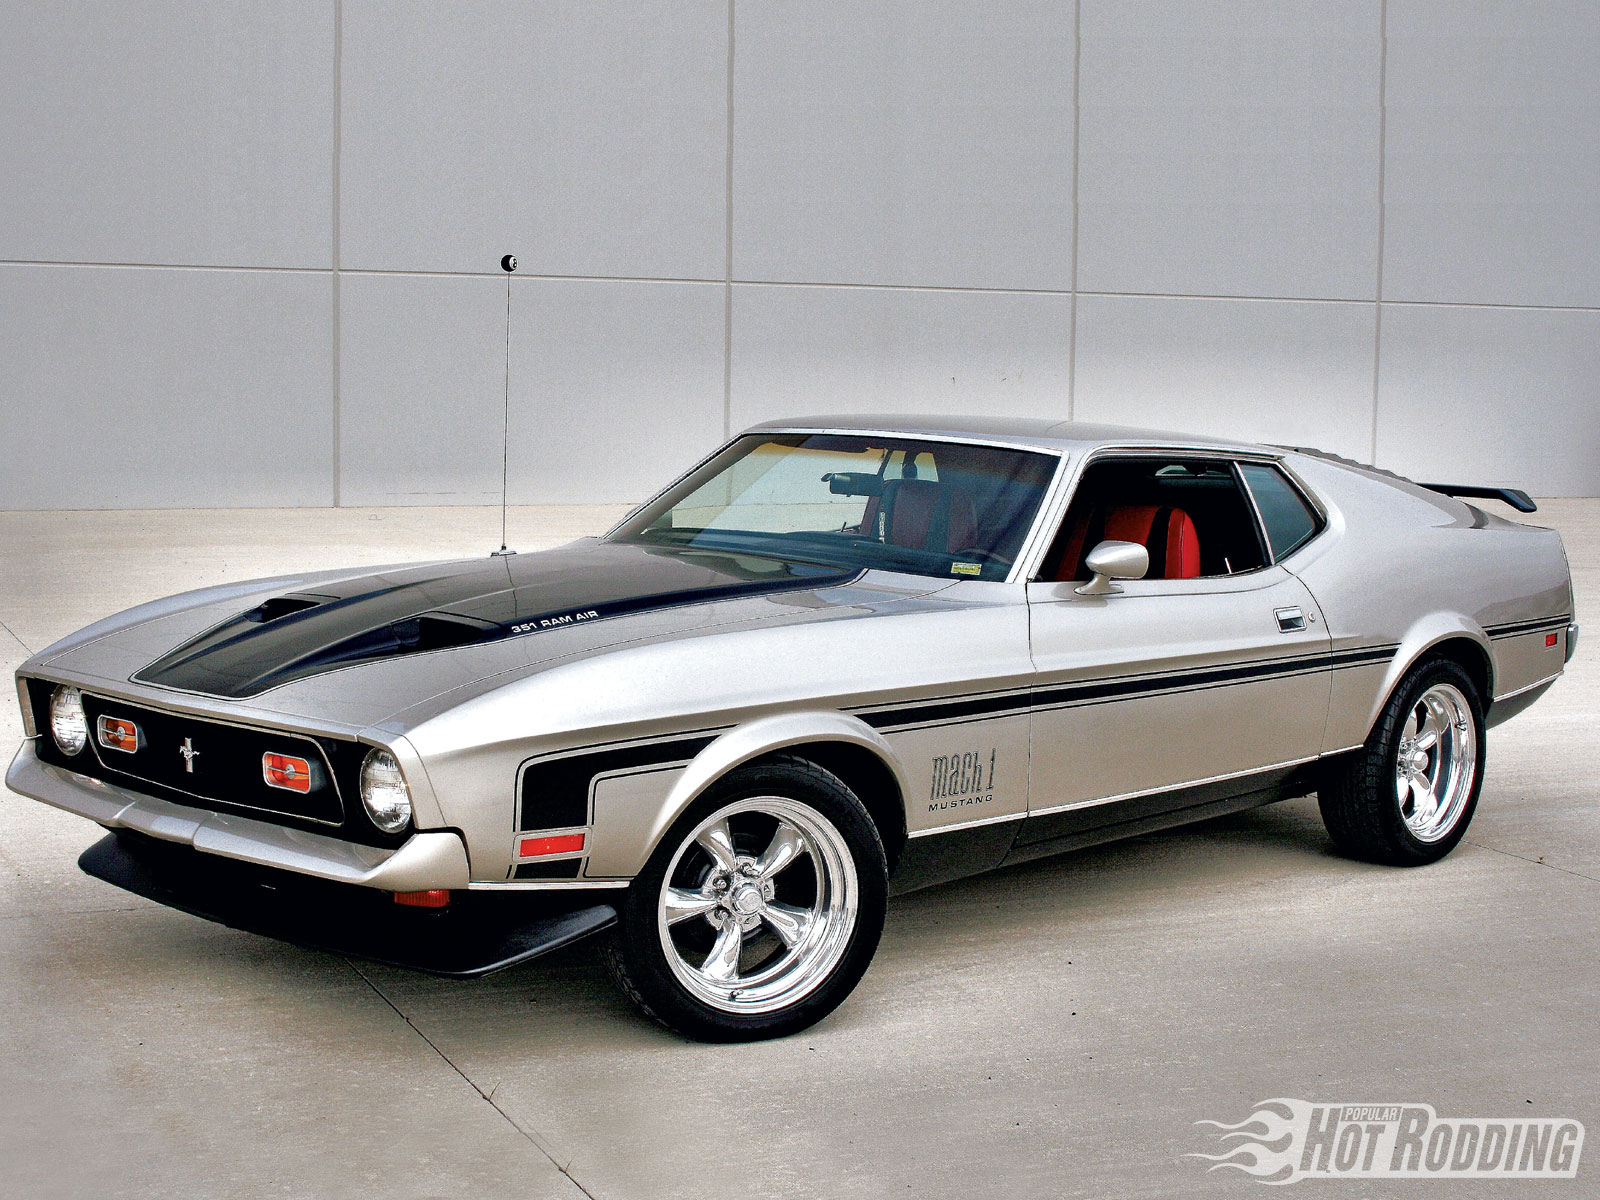 ford mustang mach 1, vehicles, classic car, fastback, ford, hot rod, muscle car